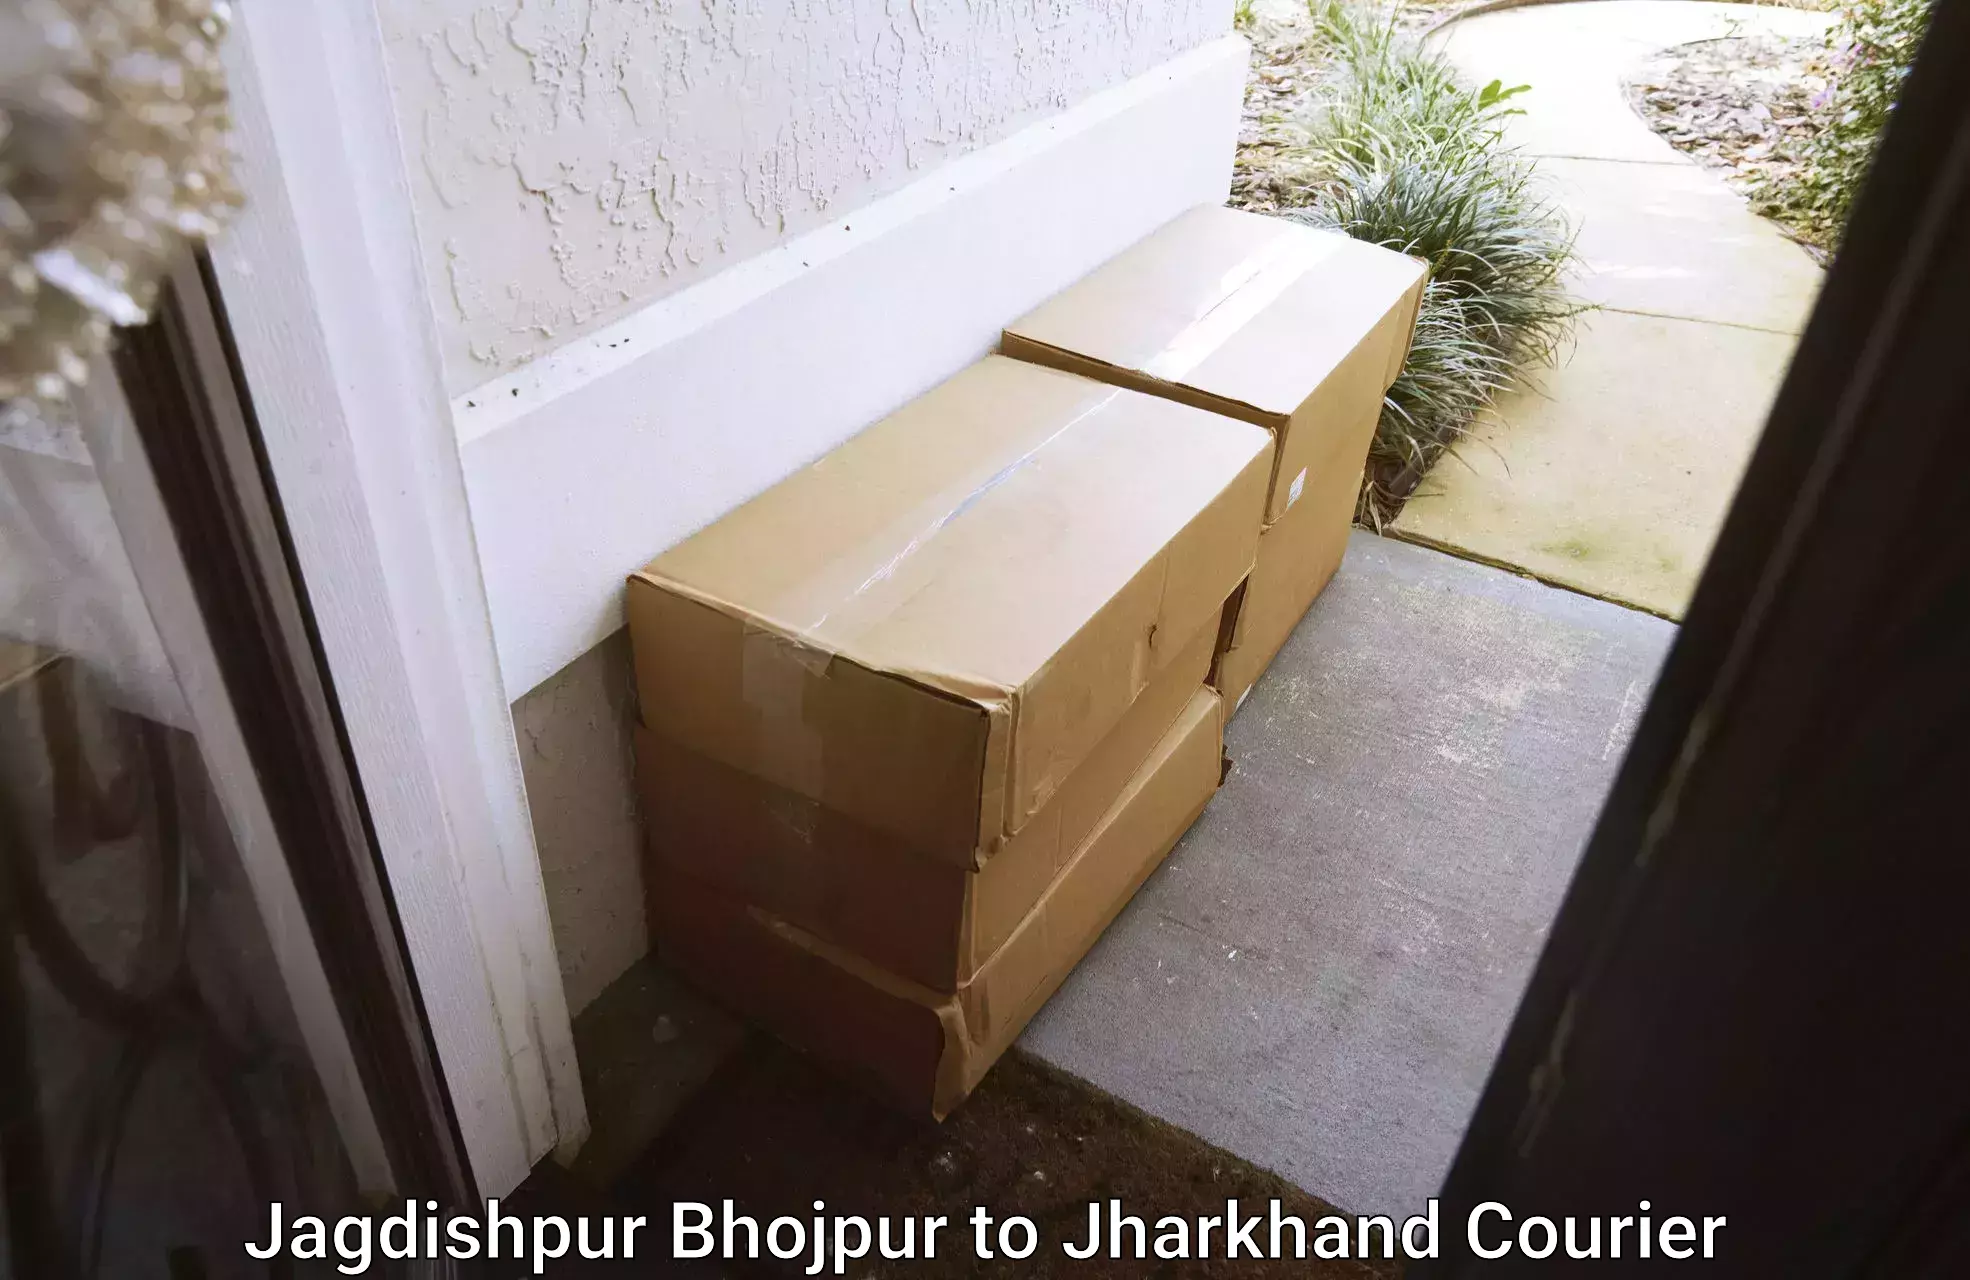 Trusted household movers Jagdishpur Bhojpur to Dhanbad